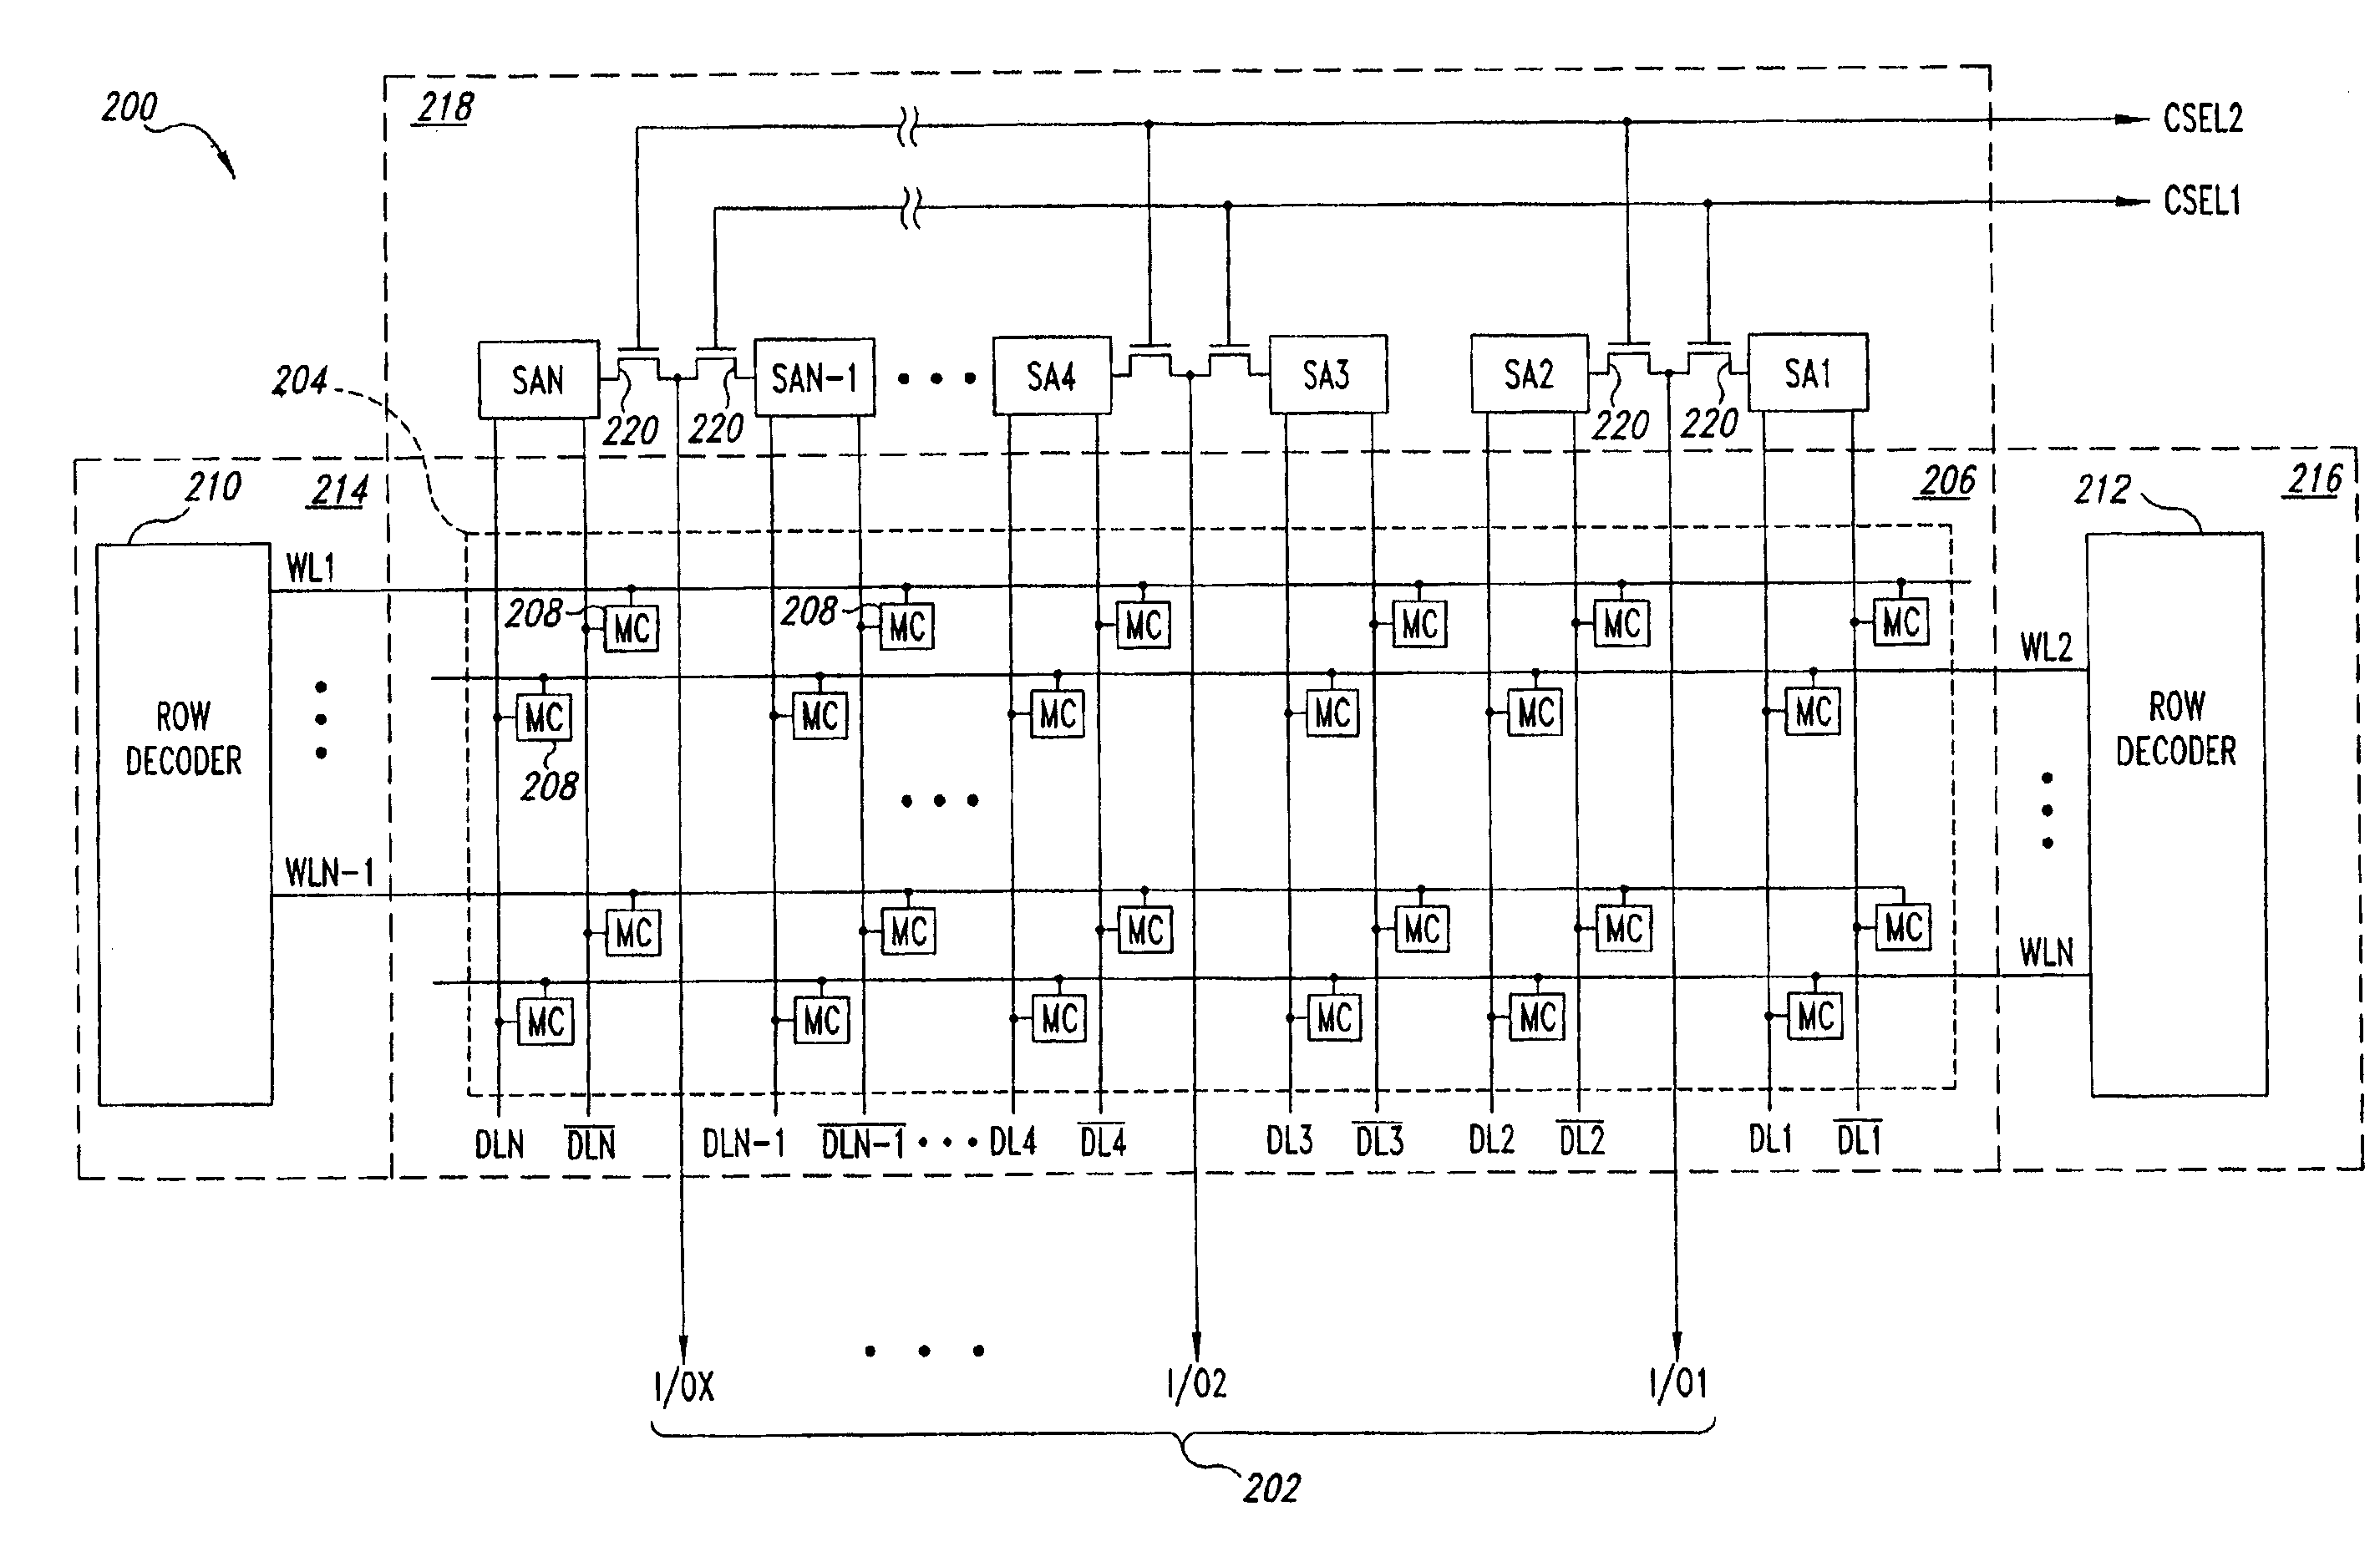 Memory device having a relatively wide data bus